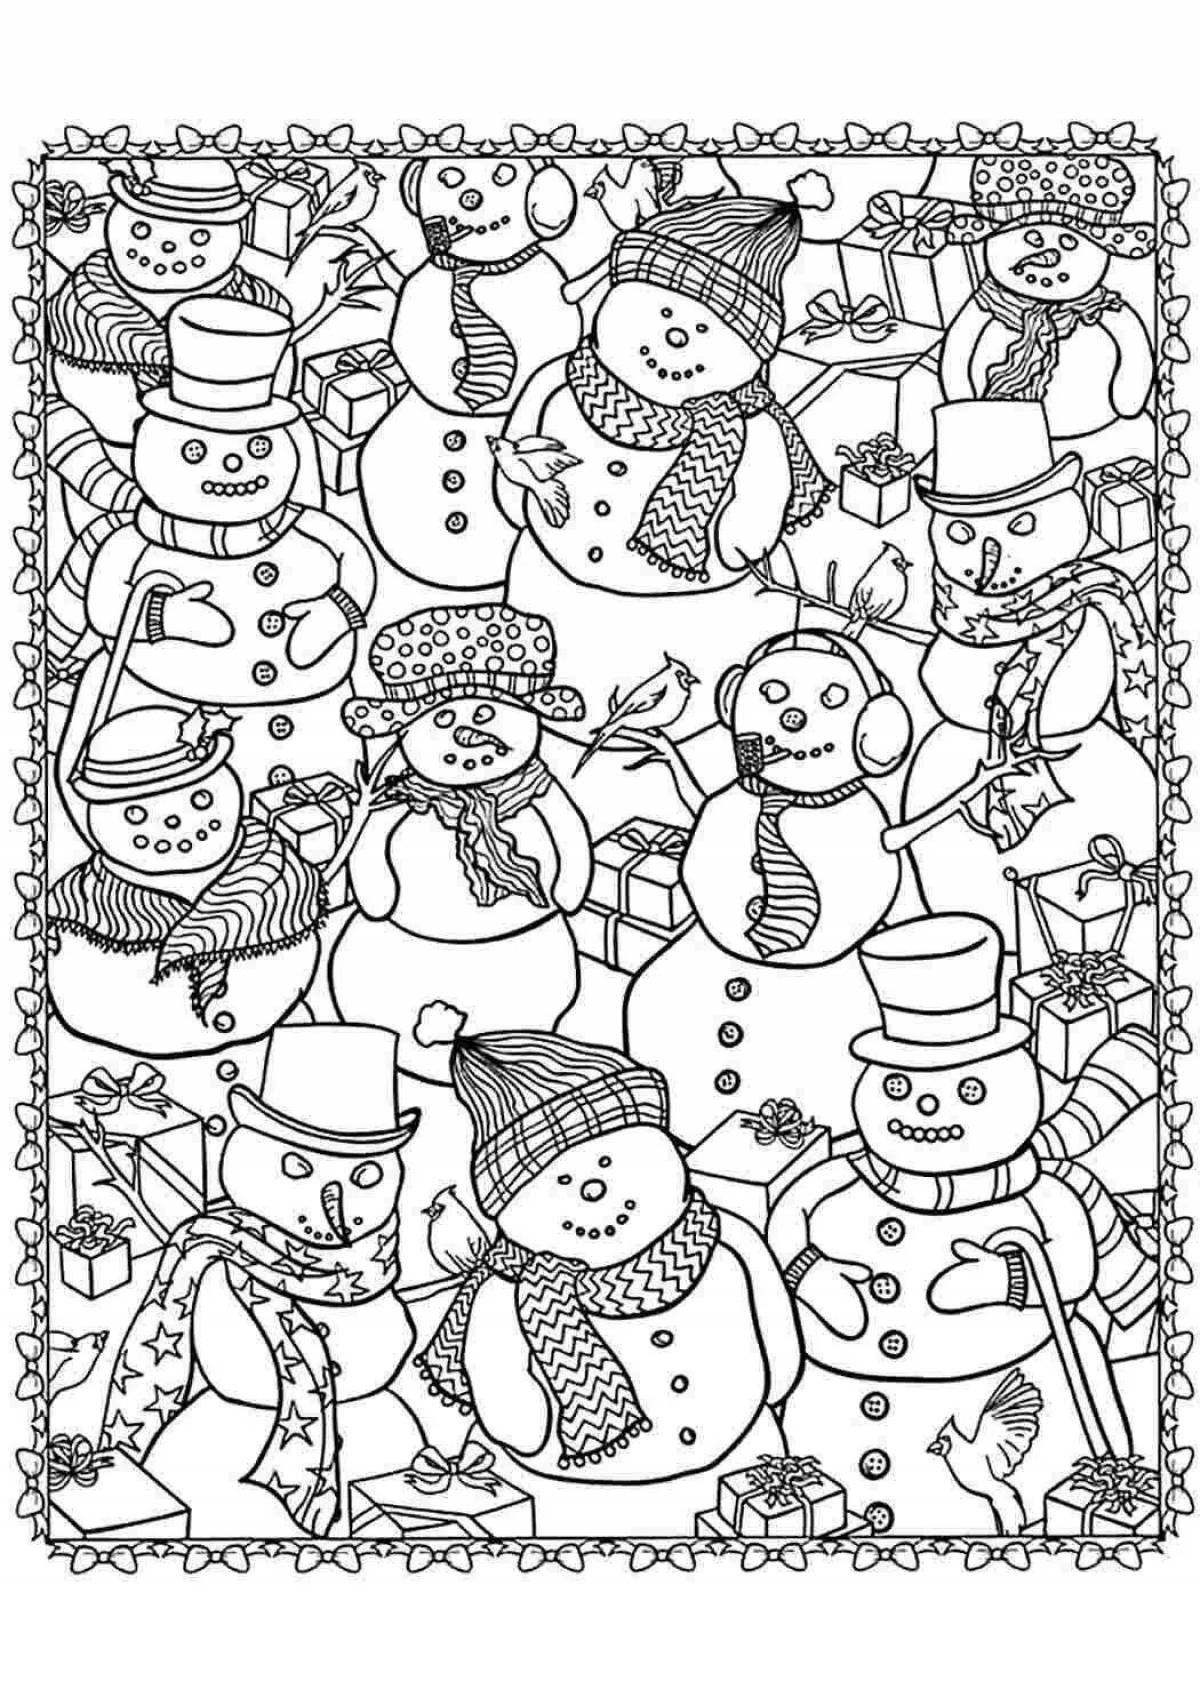 Delightful winter anti-stress coloring book for kids